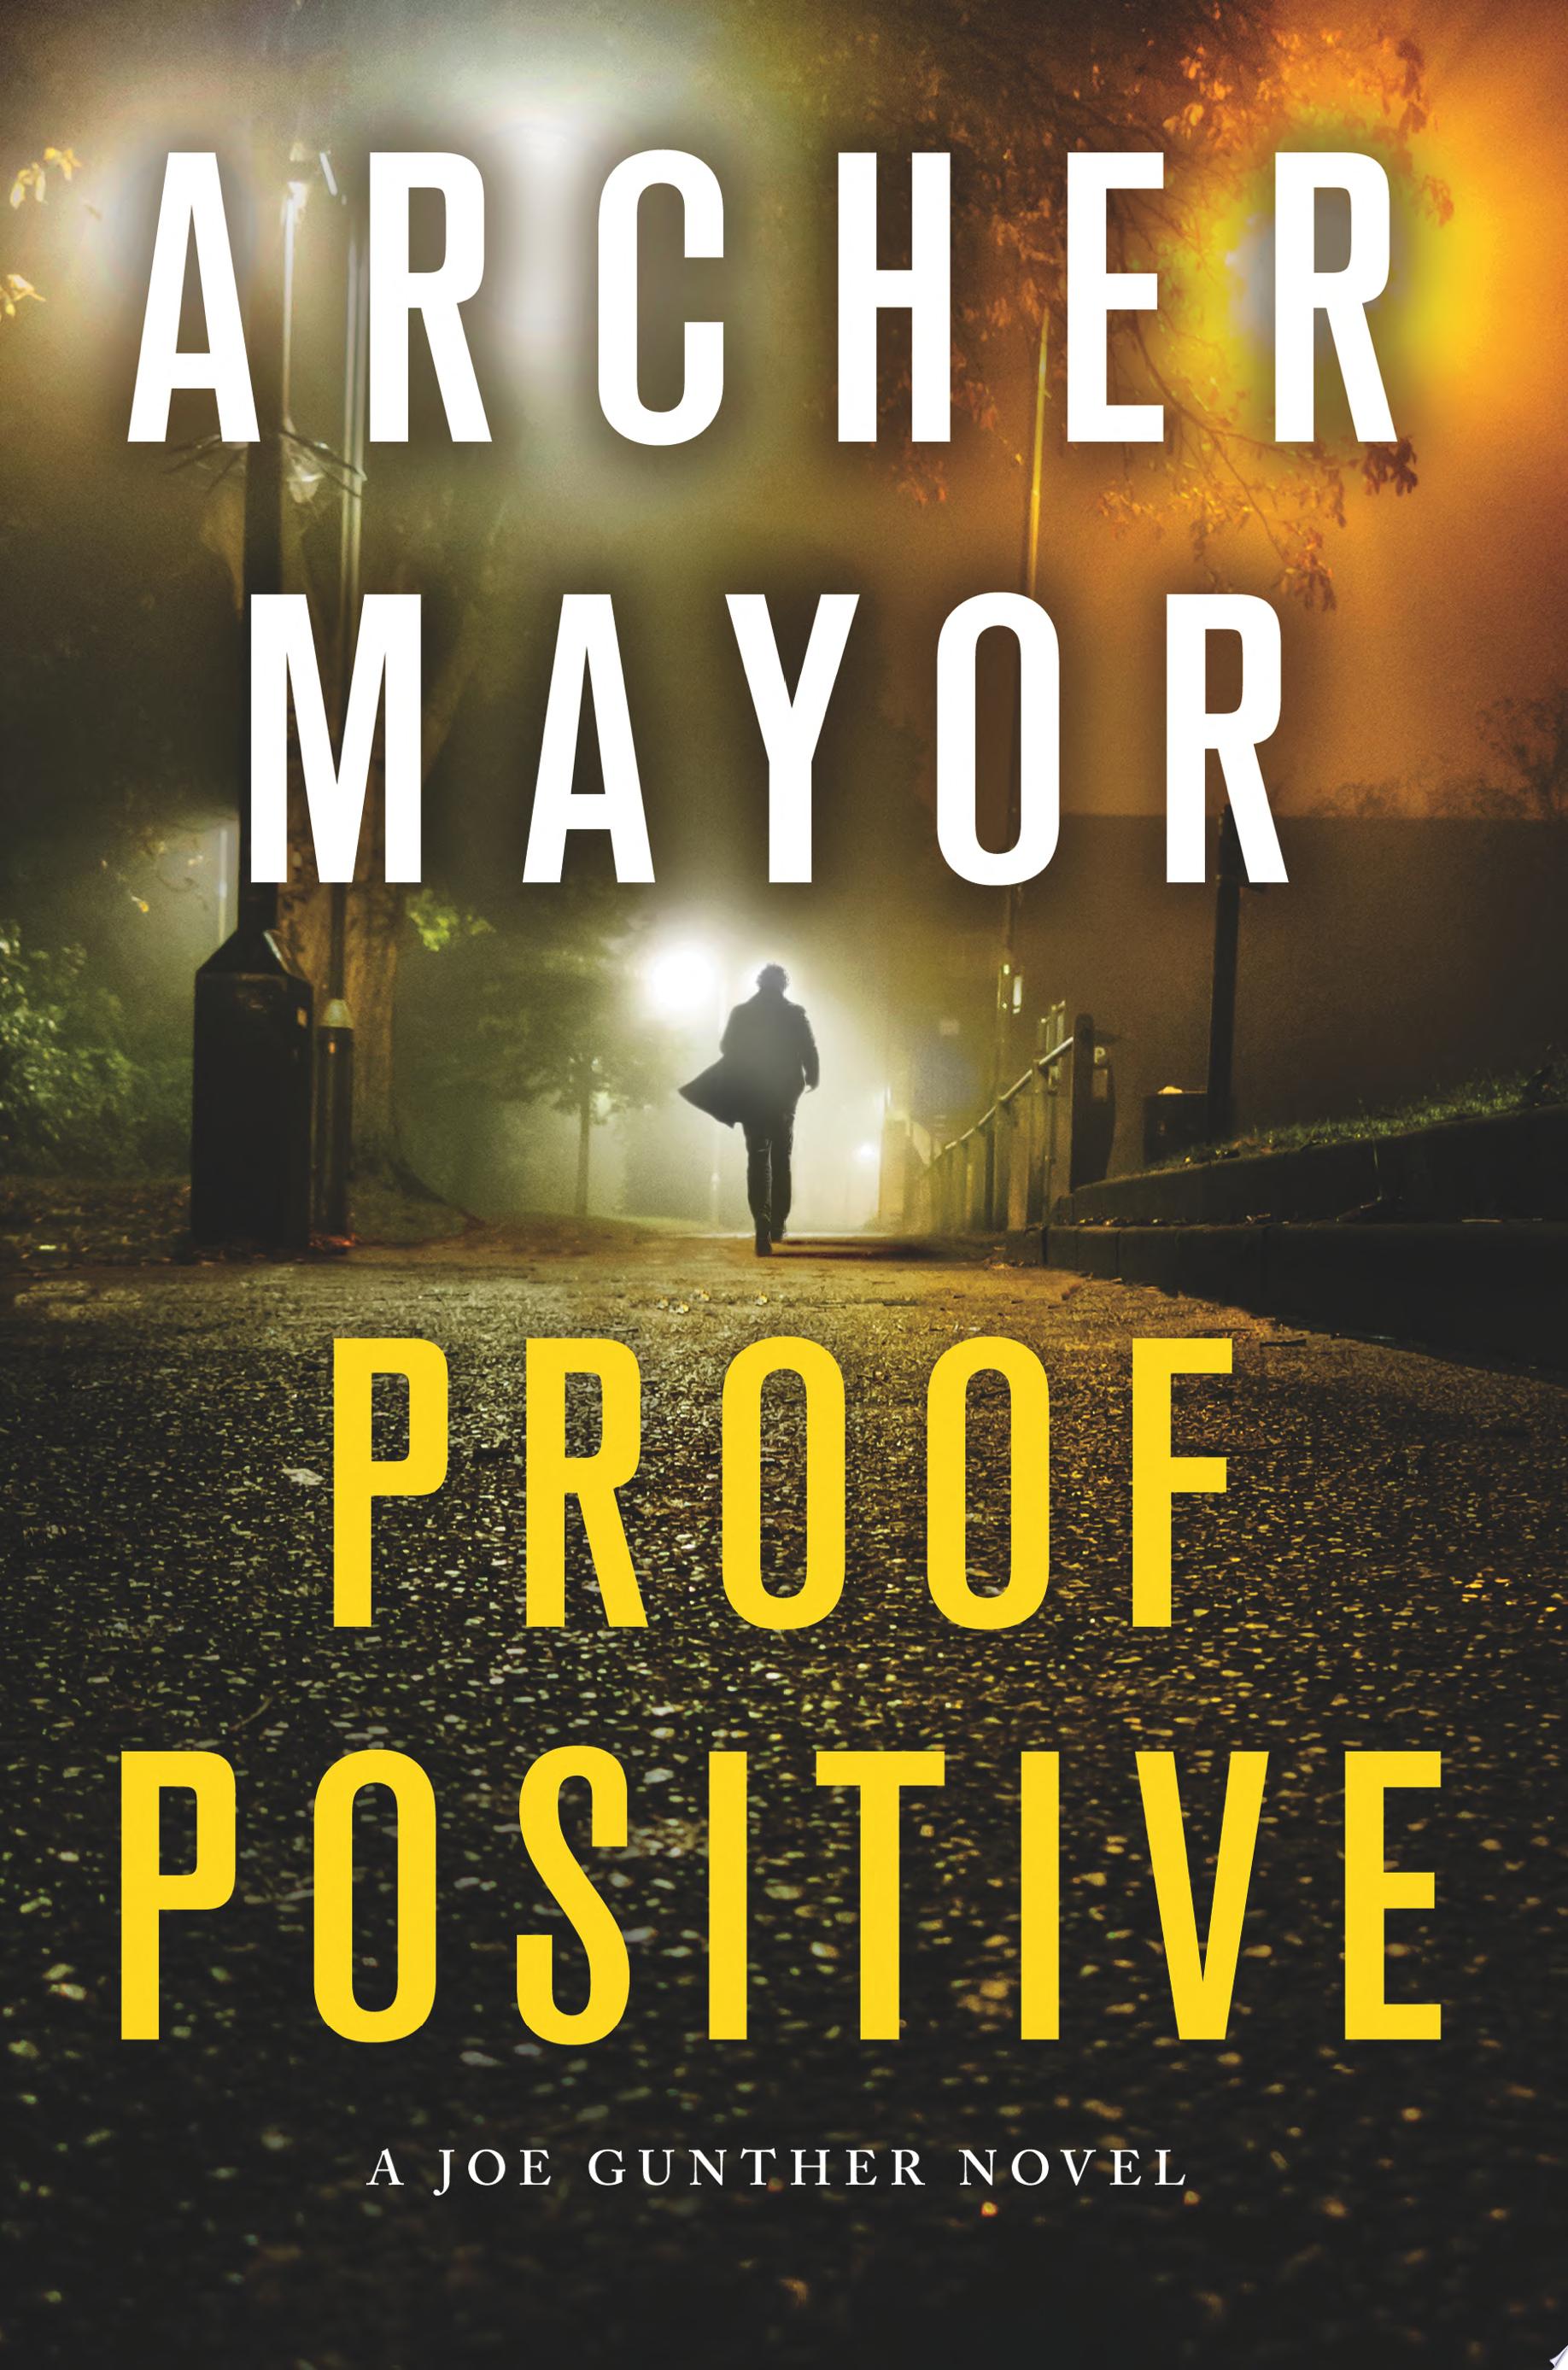 Image for "Proof Positive"